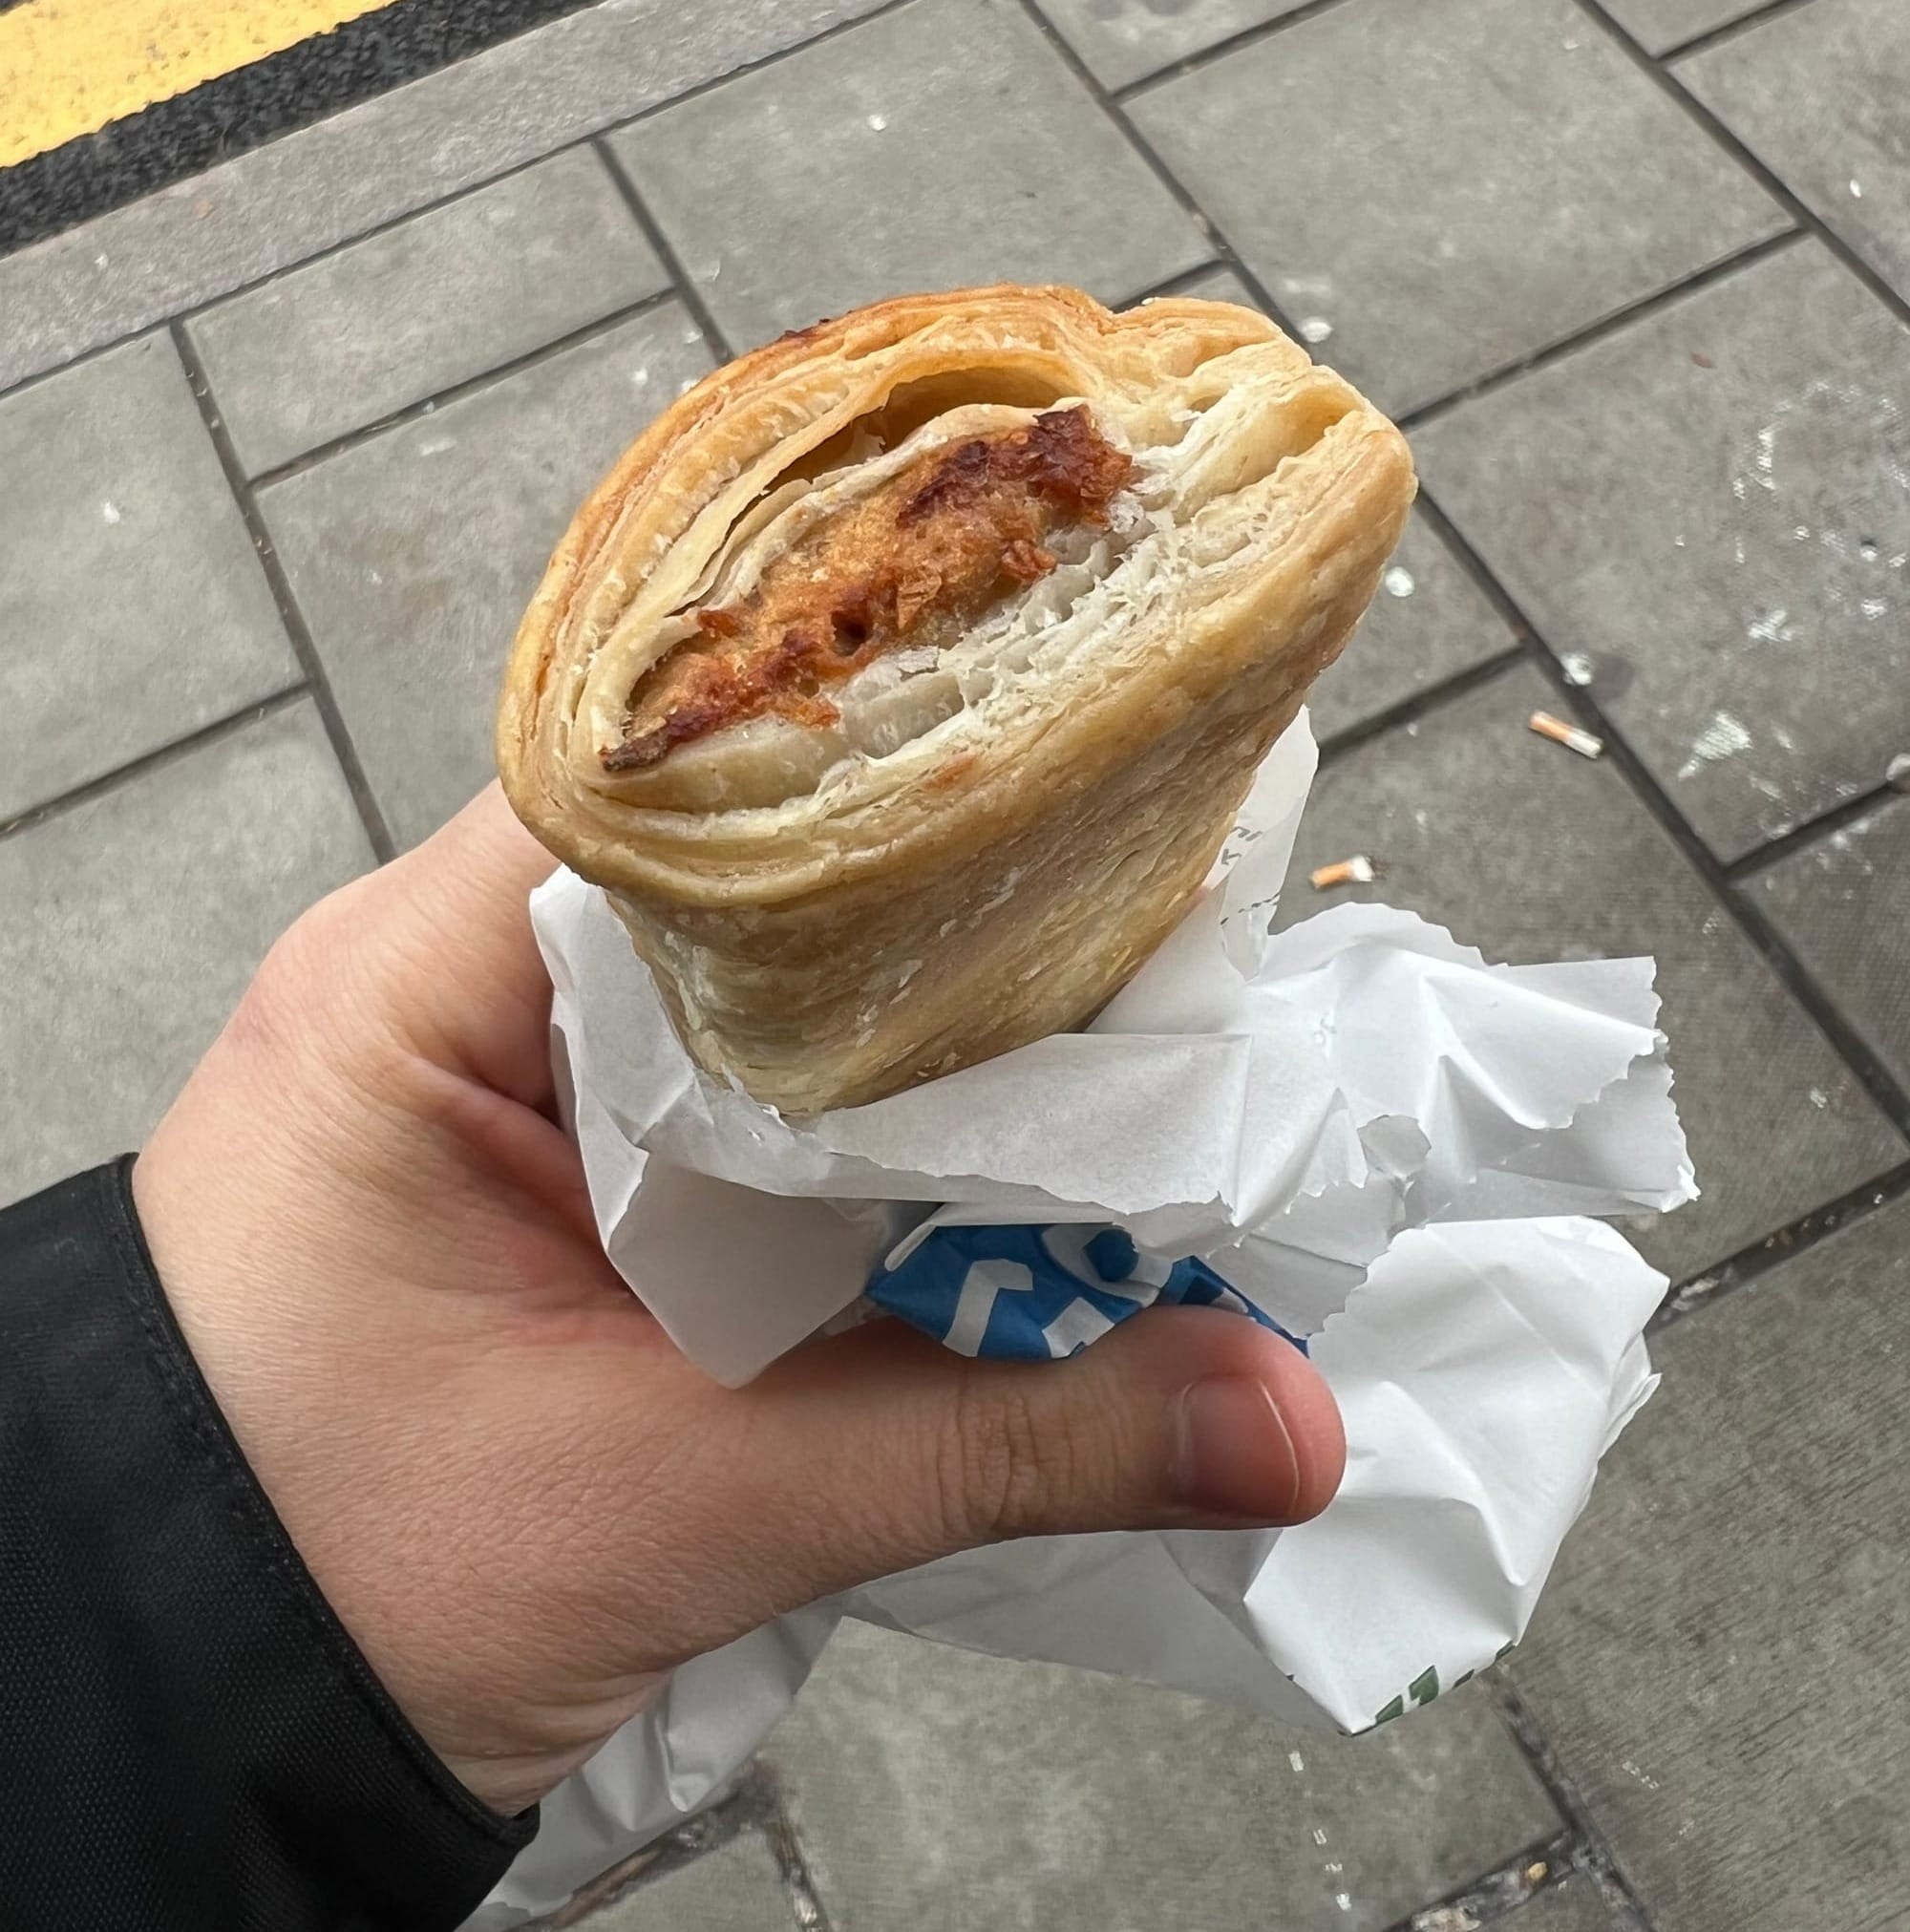 A hand holding a vegan sausage roll wrapped, still in its little wrapper from the store, outside on the sidewalk.